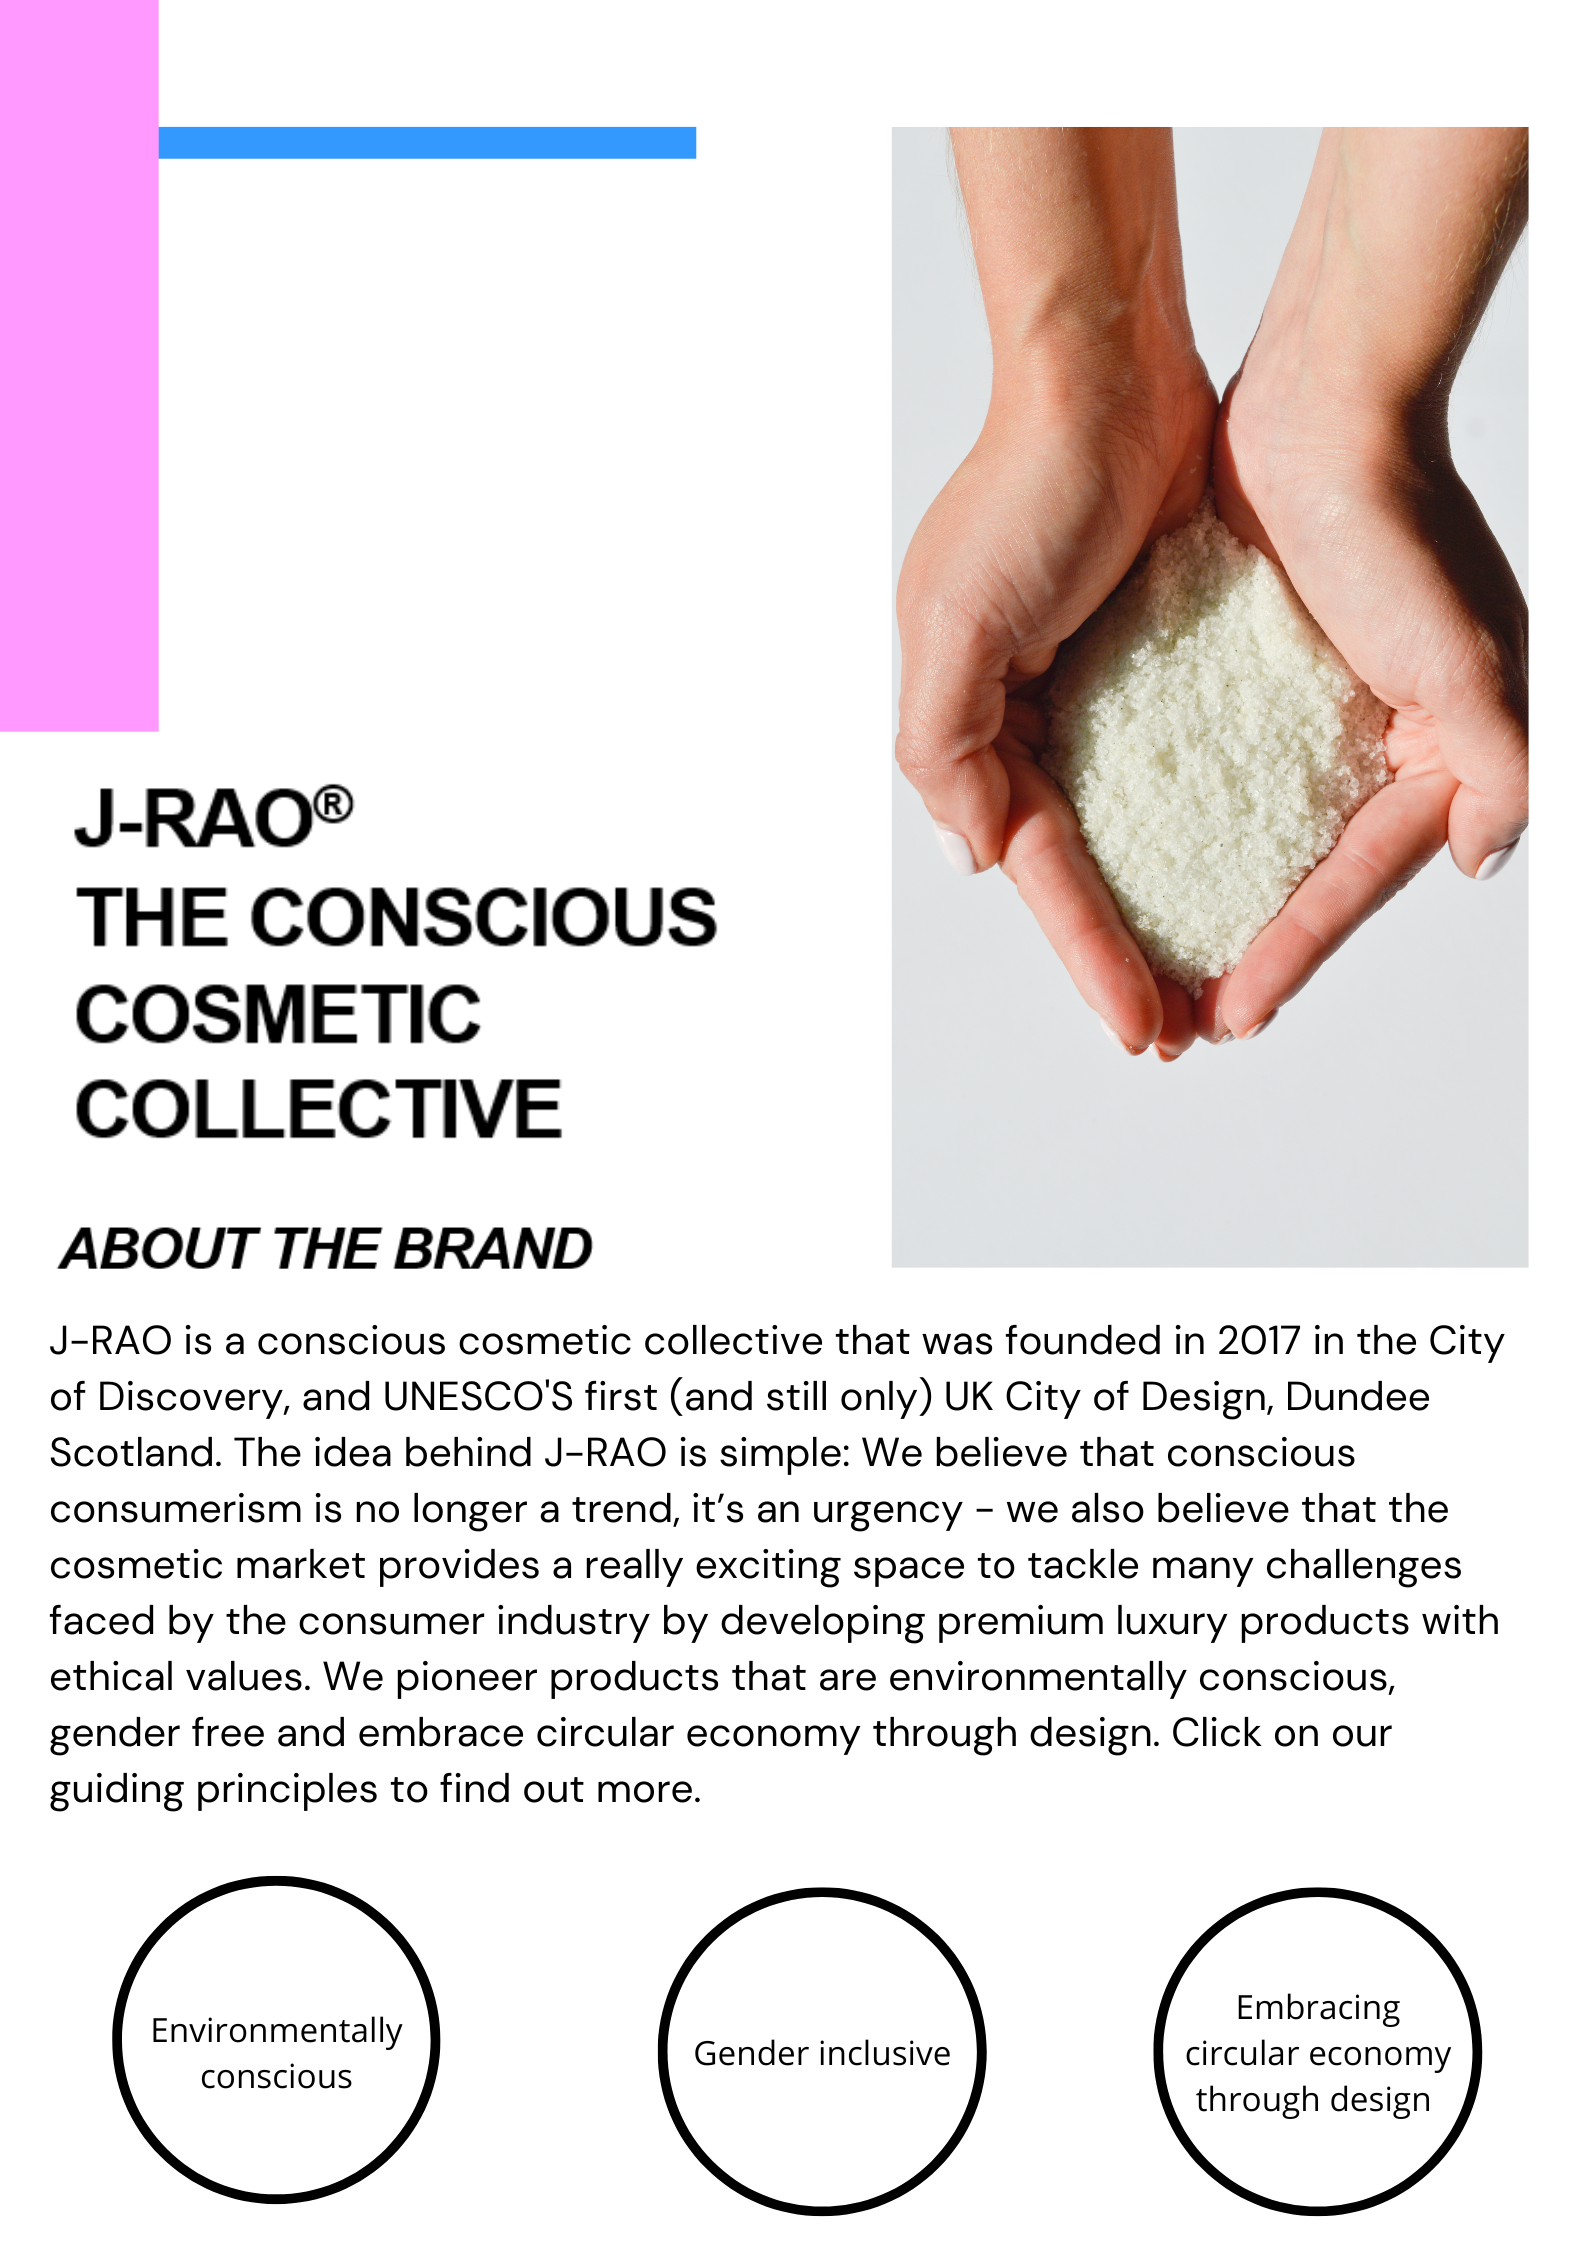 J-RAO is a conscious cosmetic collective that was founded in 2017 in the City of Discovery, and UNESCO'S first (and still only) UK City of Design, Dundee Scotland. The idea behind J-RAO is simple: We believe that conscious consumerism is no longer a trend, it’s an urgency - we also believe that the cosmetic market provides a really exciting space to tackle many challenges faced by the consumer industry by developing premium luxury products with ethical values. We pioneer products that are environmentally conscious, gender free and embrace circular economy through design. Click on our  guiding principles to find out more.